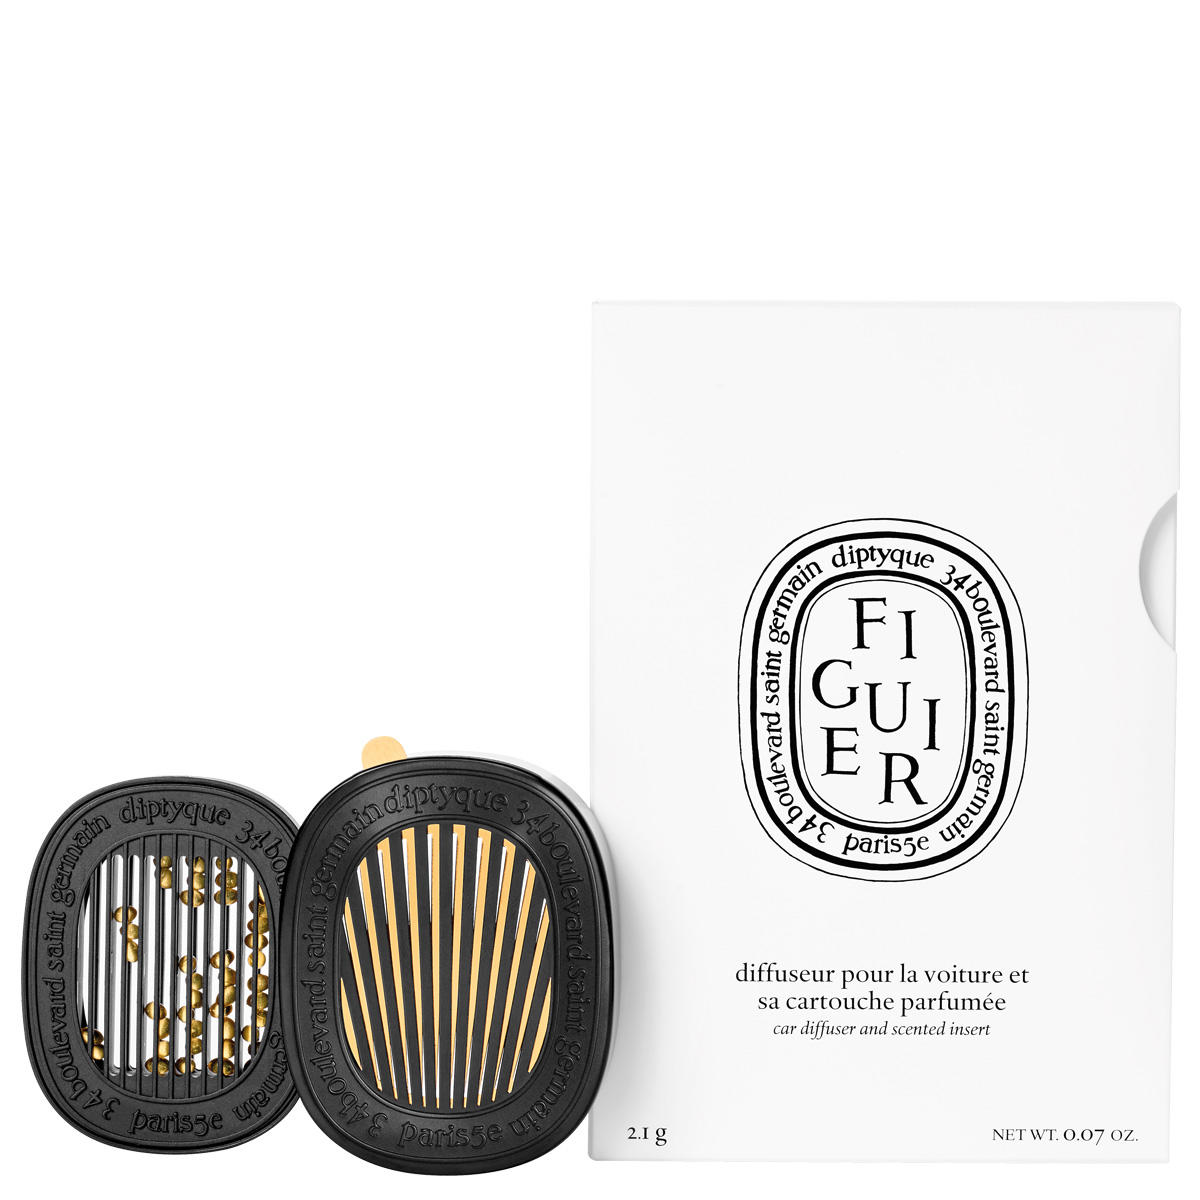 diptyque Figuier Car Diffuser and scented insert 2,1 g - 1